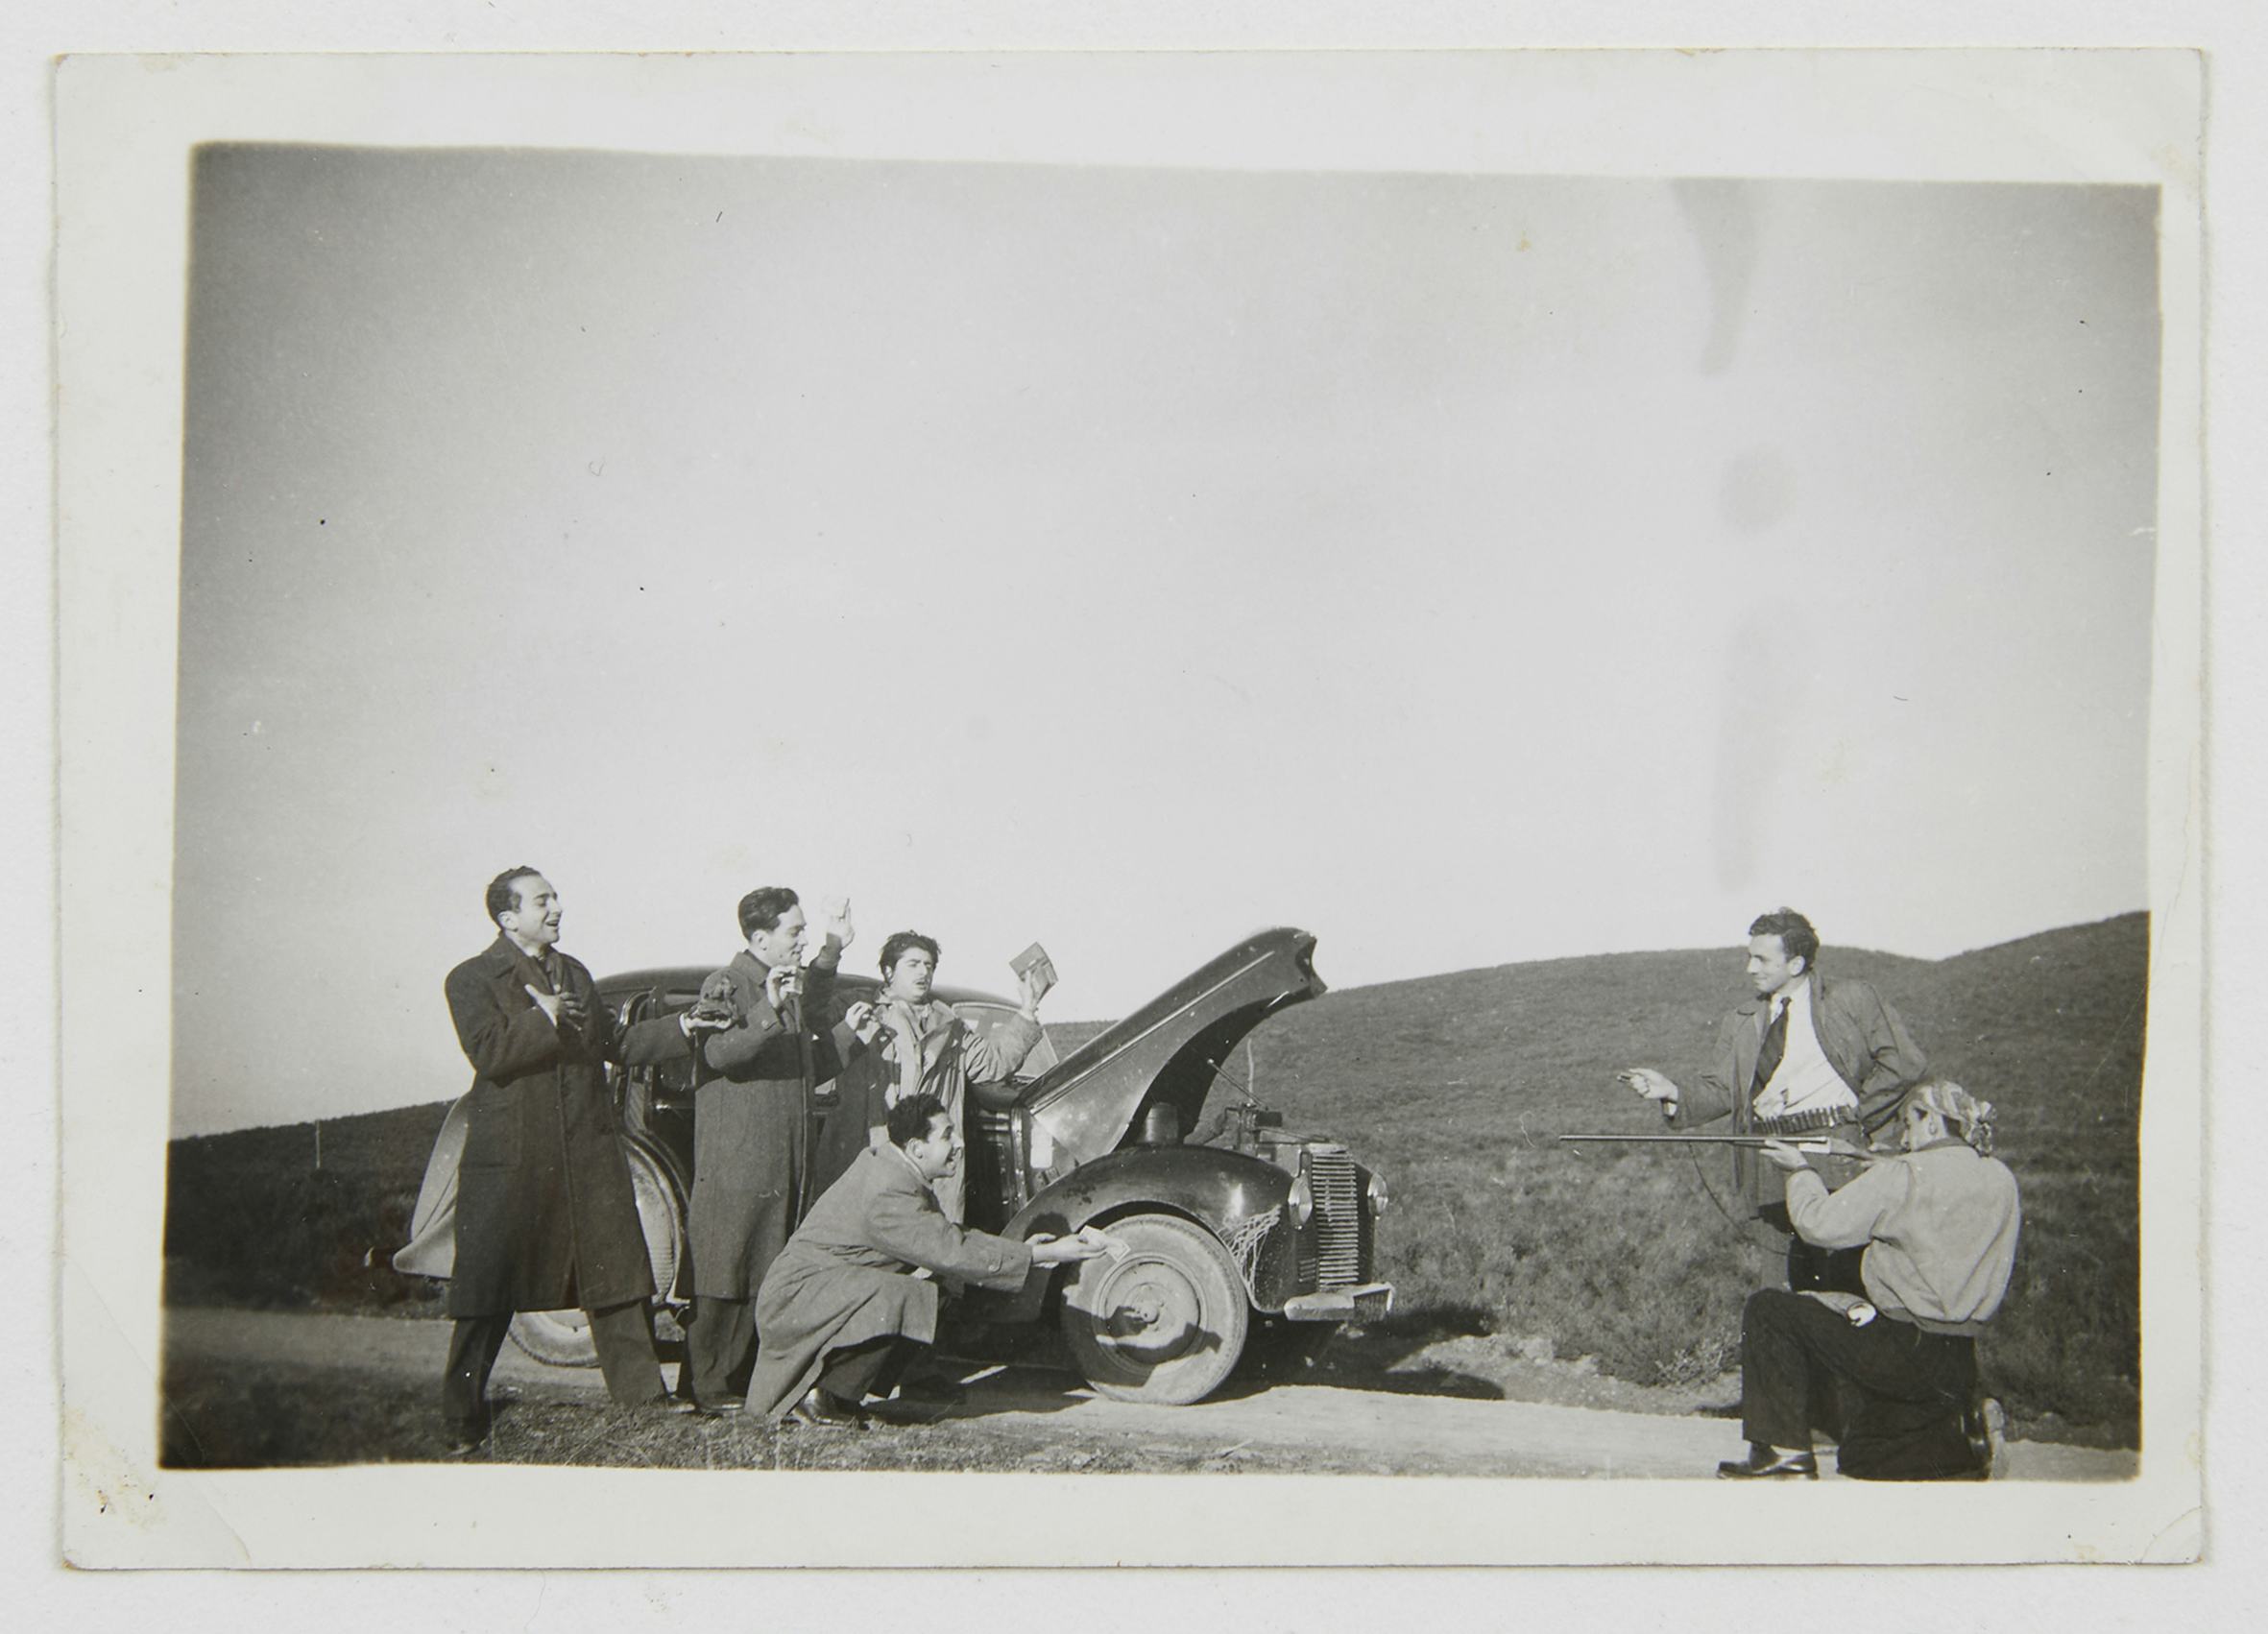 image of men standing around a car